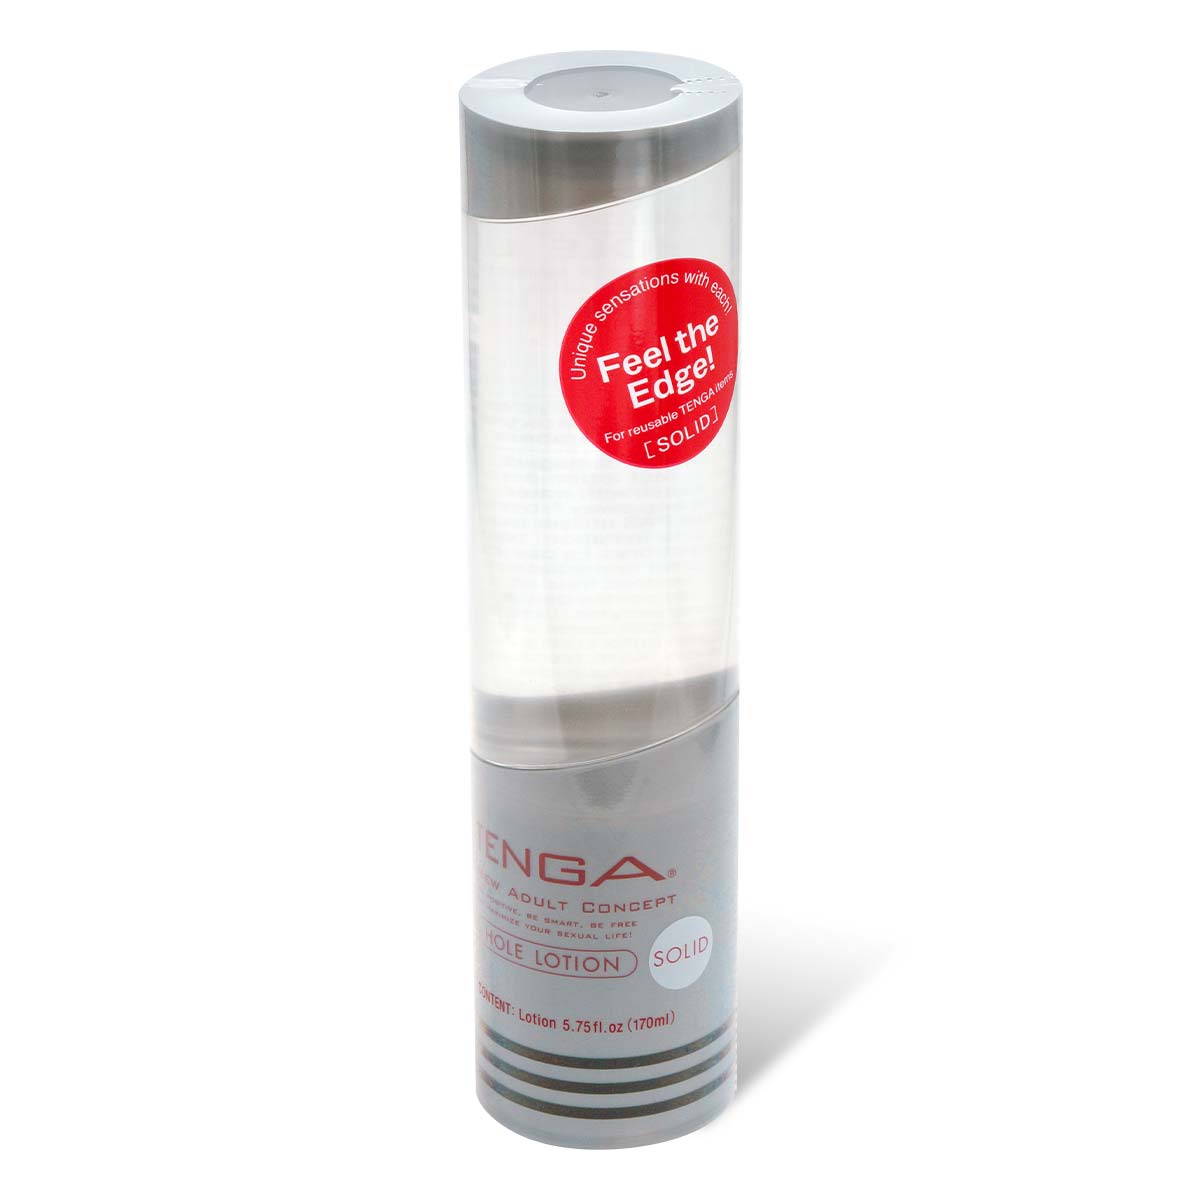 TENGA Hole Lotion SOLID 170ml Water-based Lubricant-p_1